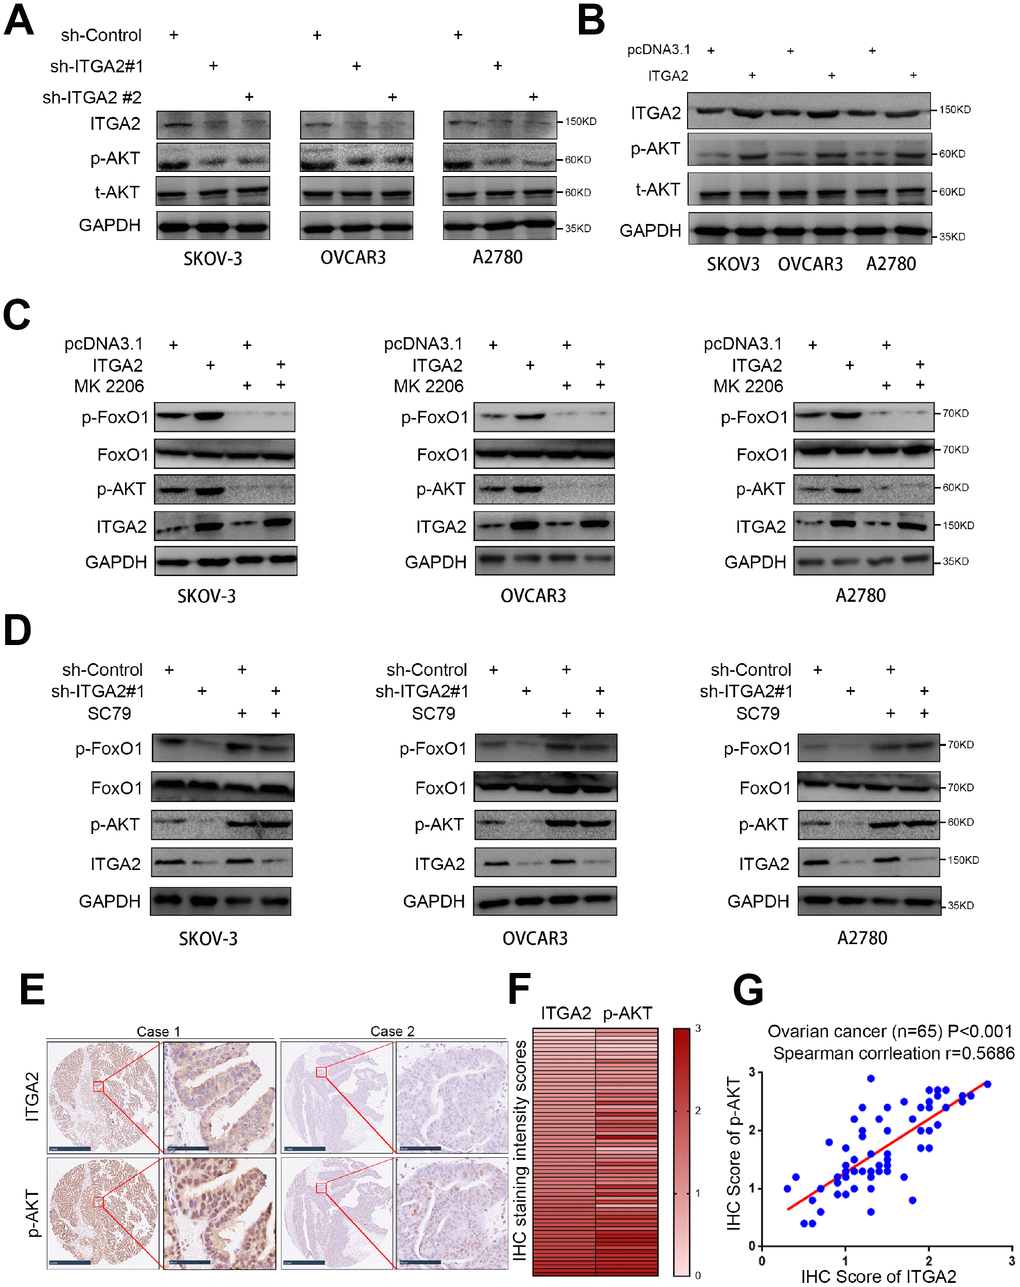 ITGA2 contributes to activating AKT pathway in ovarian cancer cells. (A) SKOV3, OVCAR3, and A2780 cells lines were infected with sh-Control, sh-ITGA2 #1, or sh-ITGA2 #2. Western blot analysis was performed with these cells after 72 hours culturing. GAPDH served as an internal reference. (B) SKOV3, OVCAR3, and A2780 cells lines were infected with or without ITGA2 plasmids. Western blot analysis was performed with these cells after 72 hours culturing. GAPDH served as an internal reference. (C) SKOV3, OVCAR3, and A2780 cells lines were infected with or without ITGA2 plasmids and were treated with or without AKT inhibitor (MK 2206). Western blot analysis was performed with these cells after 72 hours culturing. GAPDH served as an internal reference. (D) SKOV3, OVCAR3, and A2780 cells lines were infected with sh-Control, sh-ITGA2 #1, or sh-ITGA2 #2 and were treated with or without AKT agonist (SC79). Western blot analysis was performed with these cells after 72 hours culturing. GAPDH served as an internal reference. (E) IHC Images of ITGA2 and p-AKT staining using TMA tissue sections (n = 65 ovarian cancer patient specimens). The scale bars were shown as indicated. f and g. Heatmap (F) and dot plot (G) to show the correlation of IHC scores for the expression of the ITGA2 and p-AKT proteins in ovarian cancer patient specimens. (r = 0.5686 for spearman correlation coefficients, P 